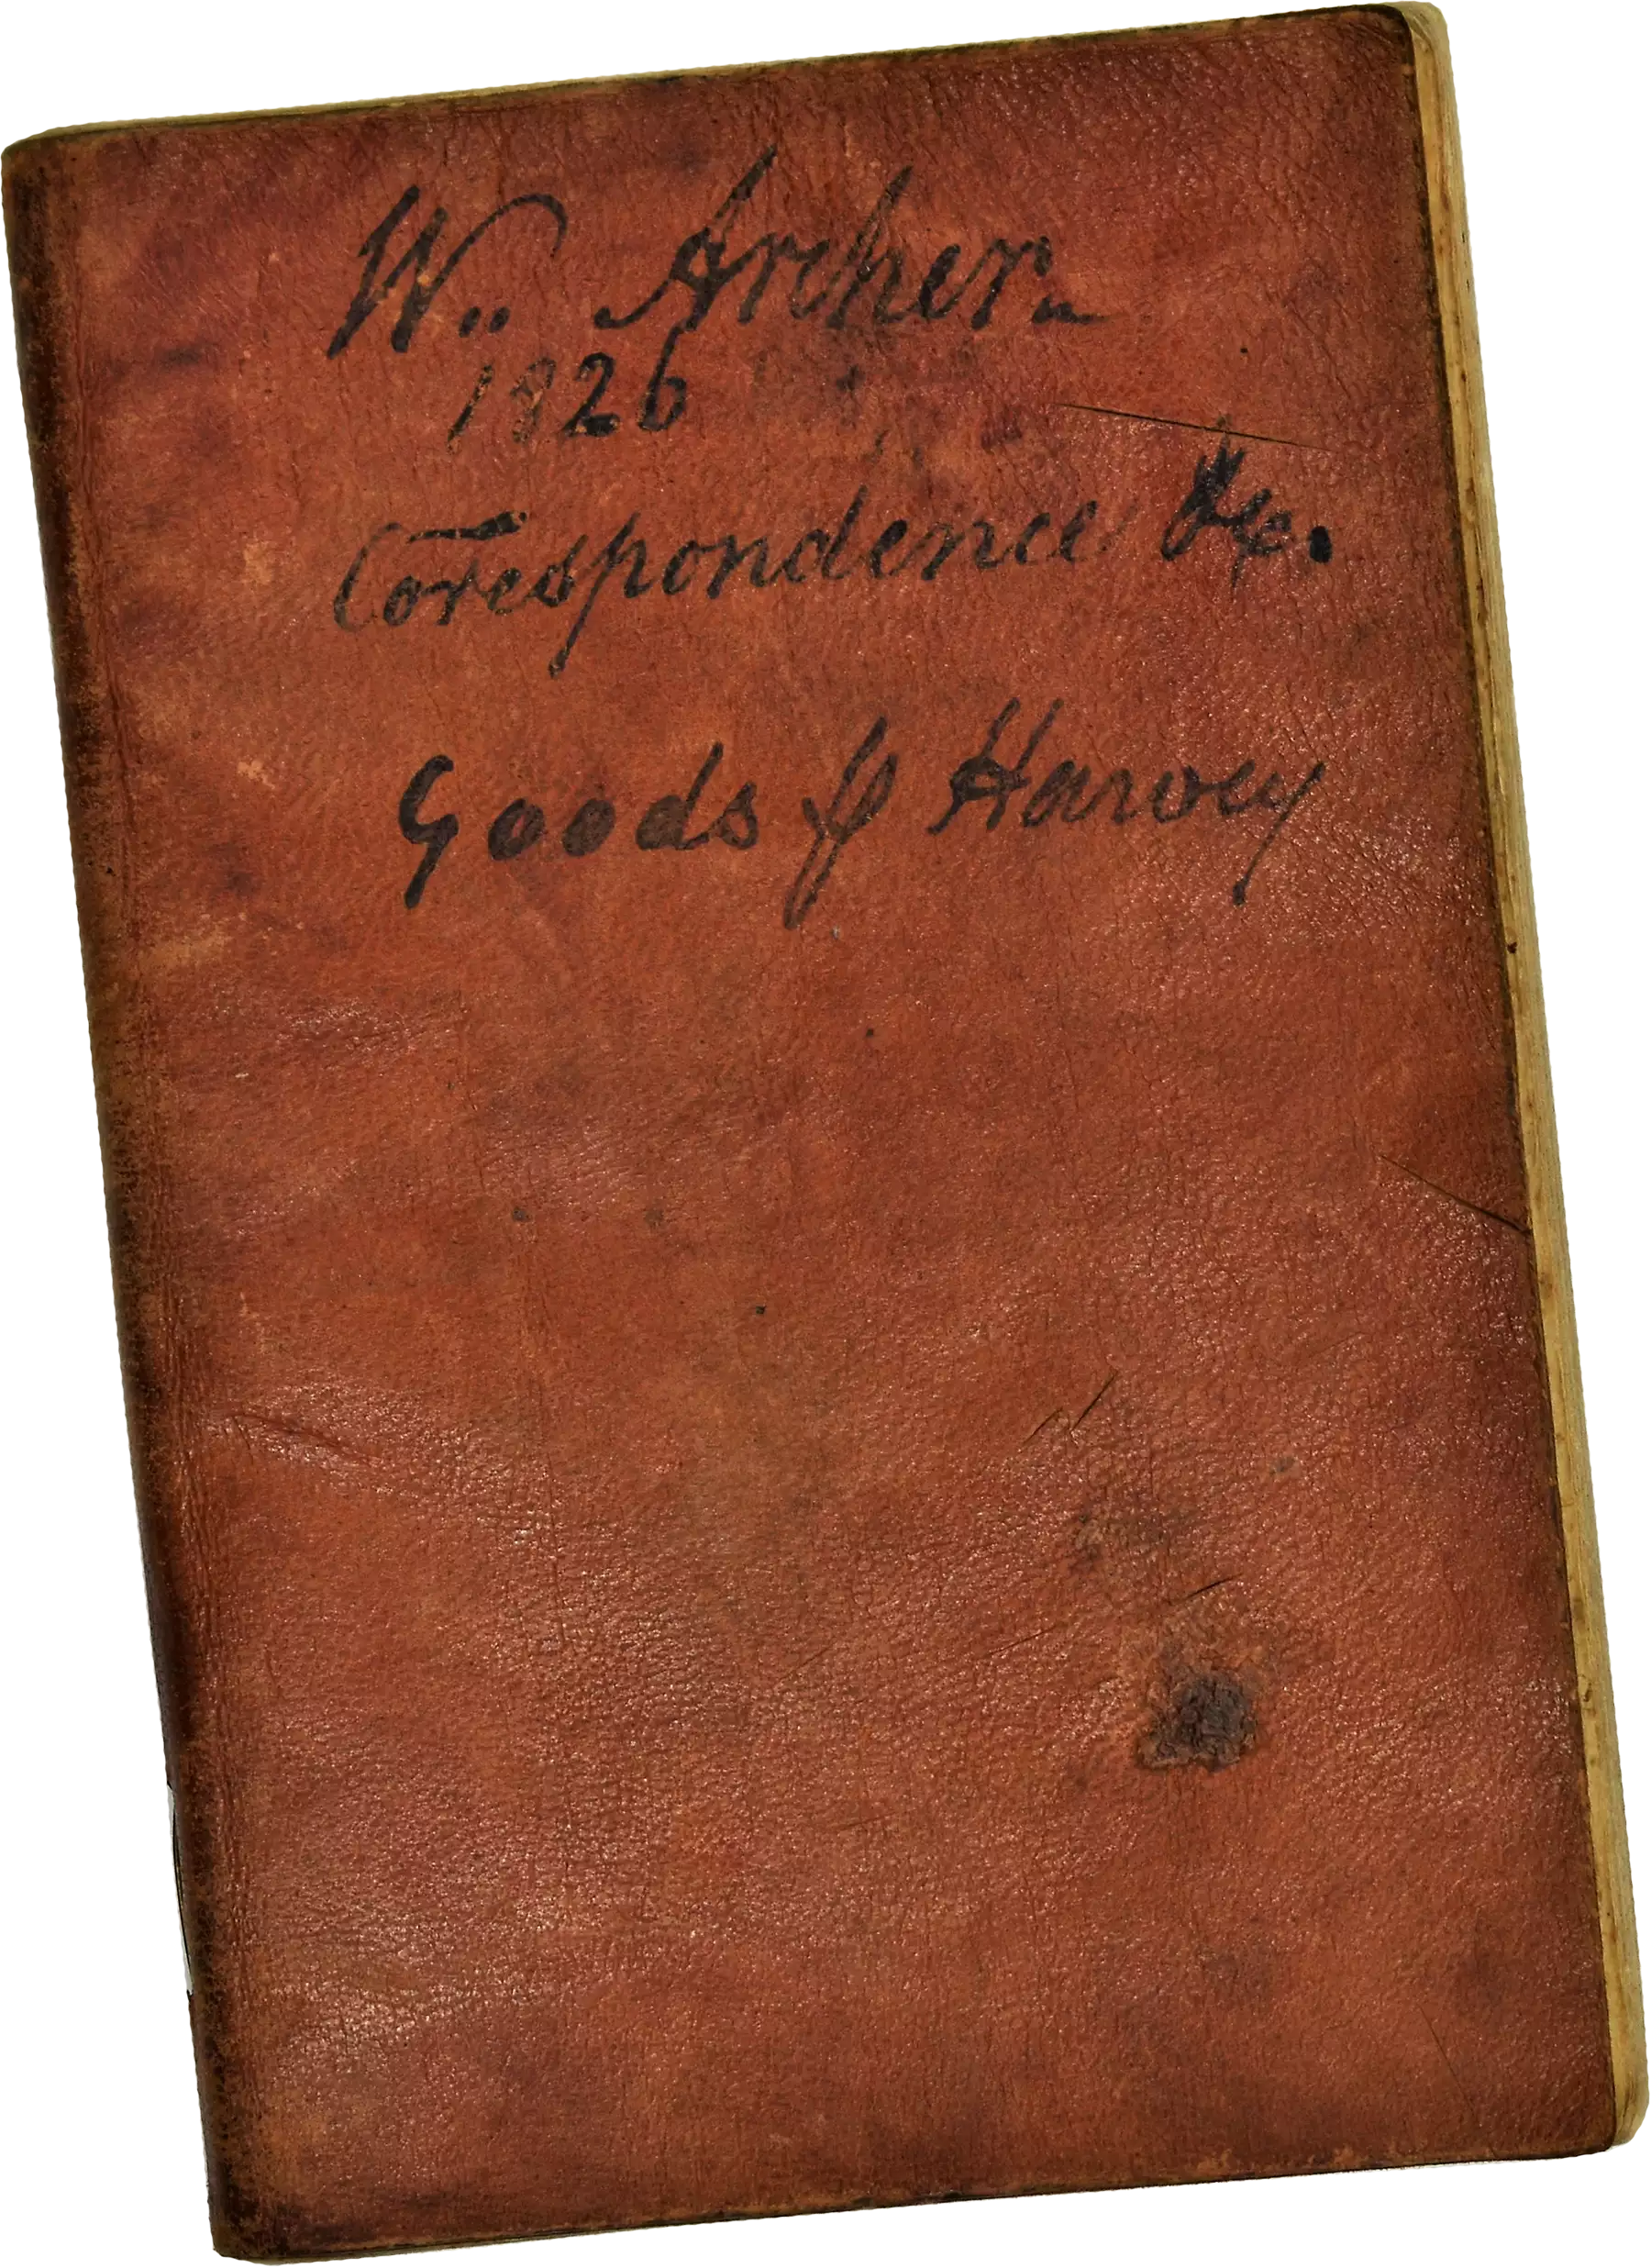 One of William Archer’s many ledgers.